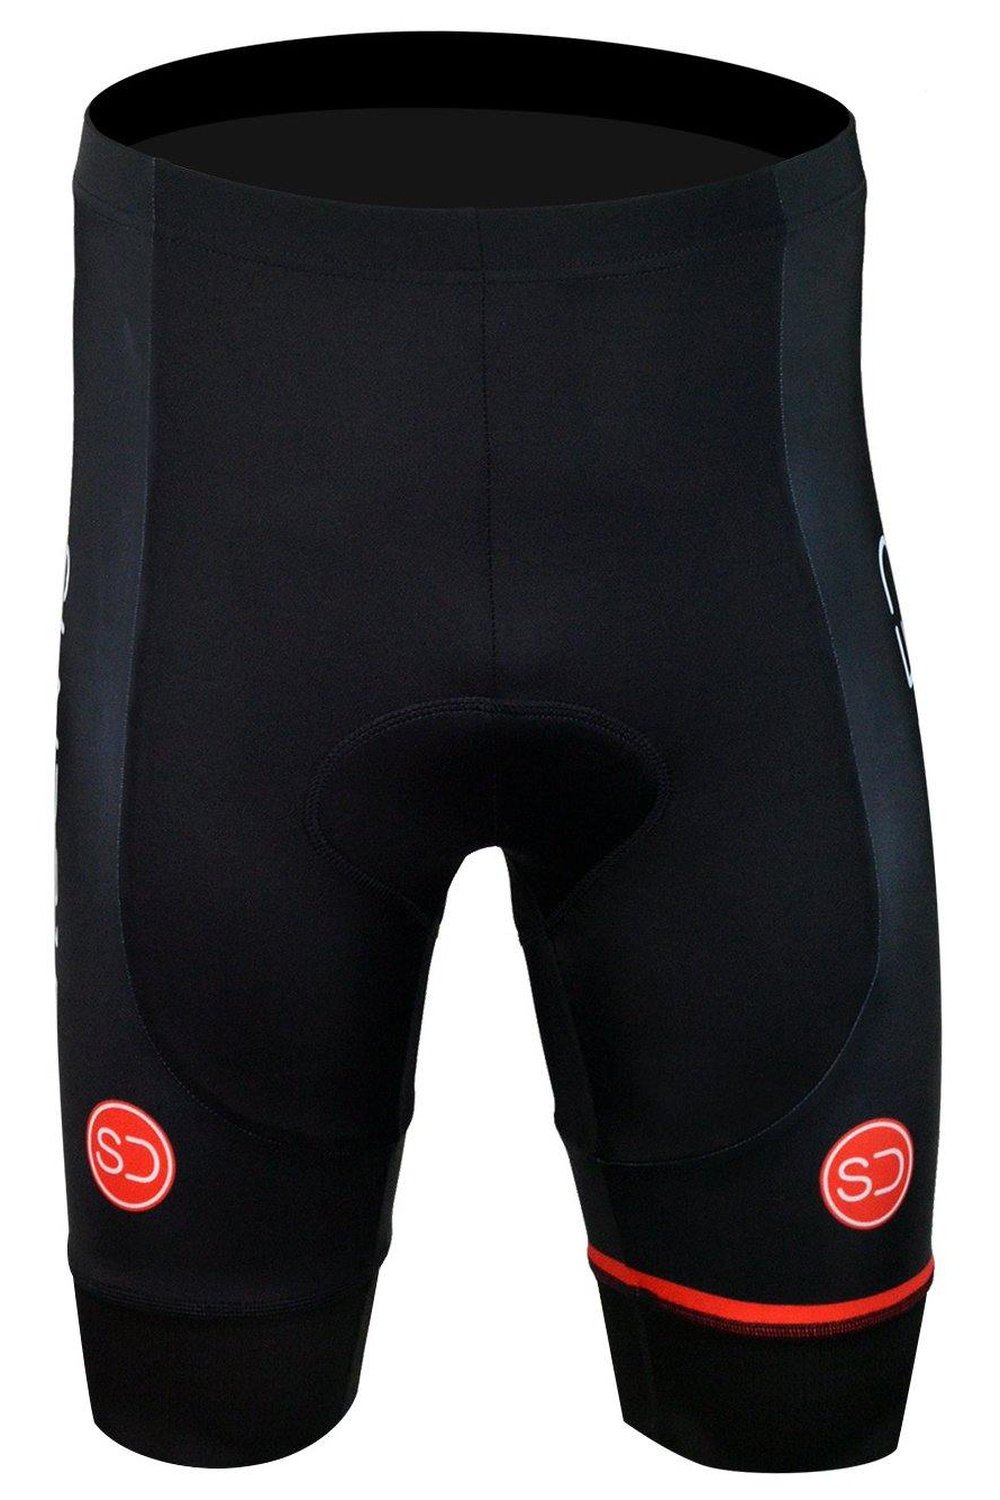 Sundried Mens 3/4 Length Padded Cycle Tights Premium Bike Clothing